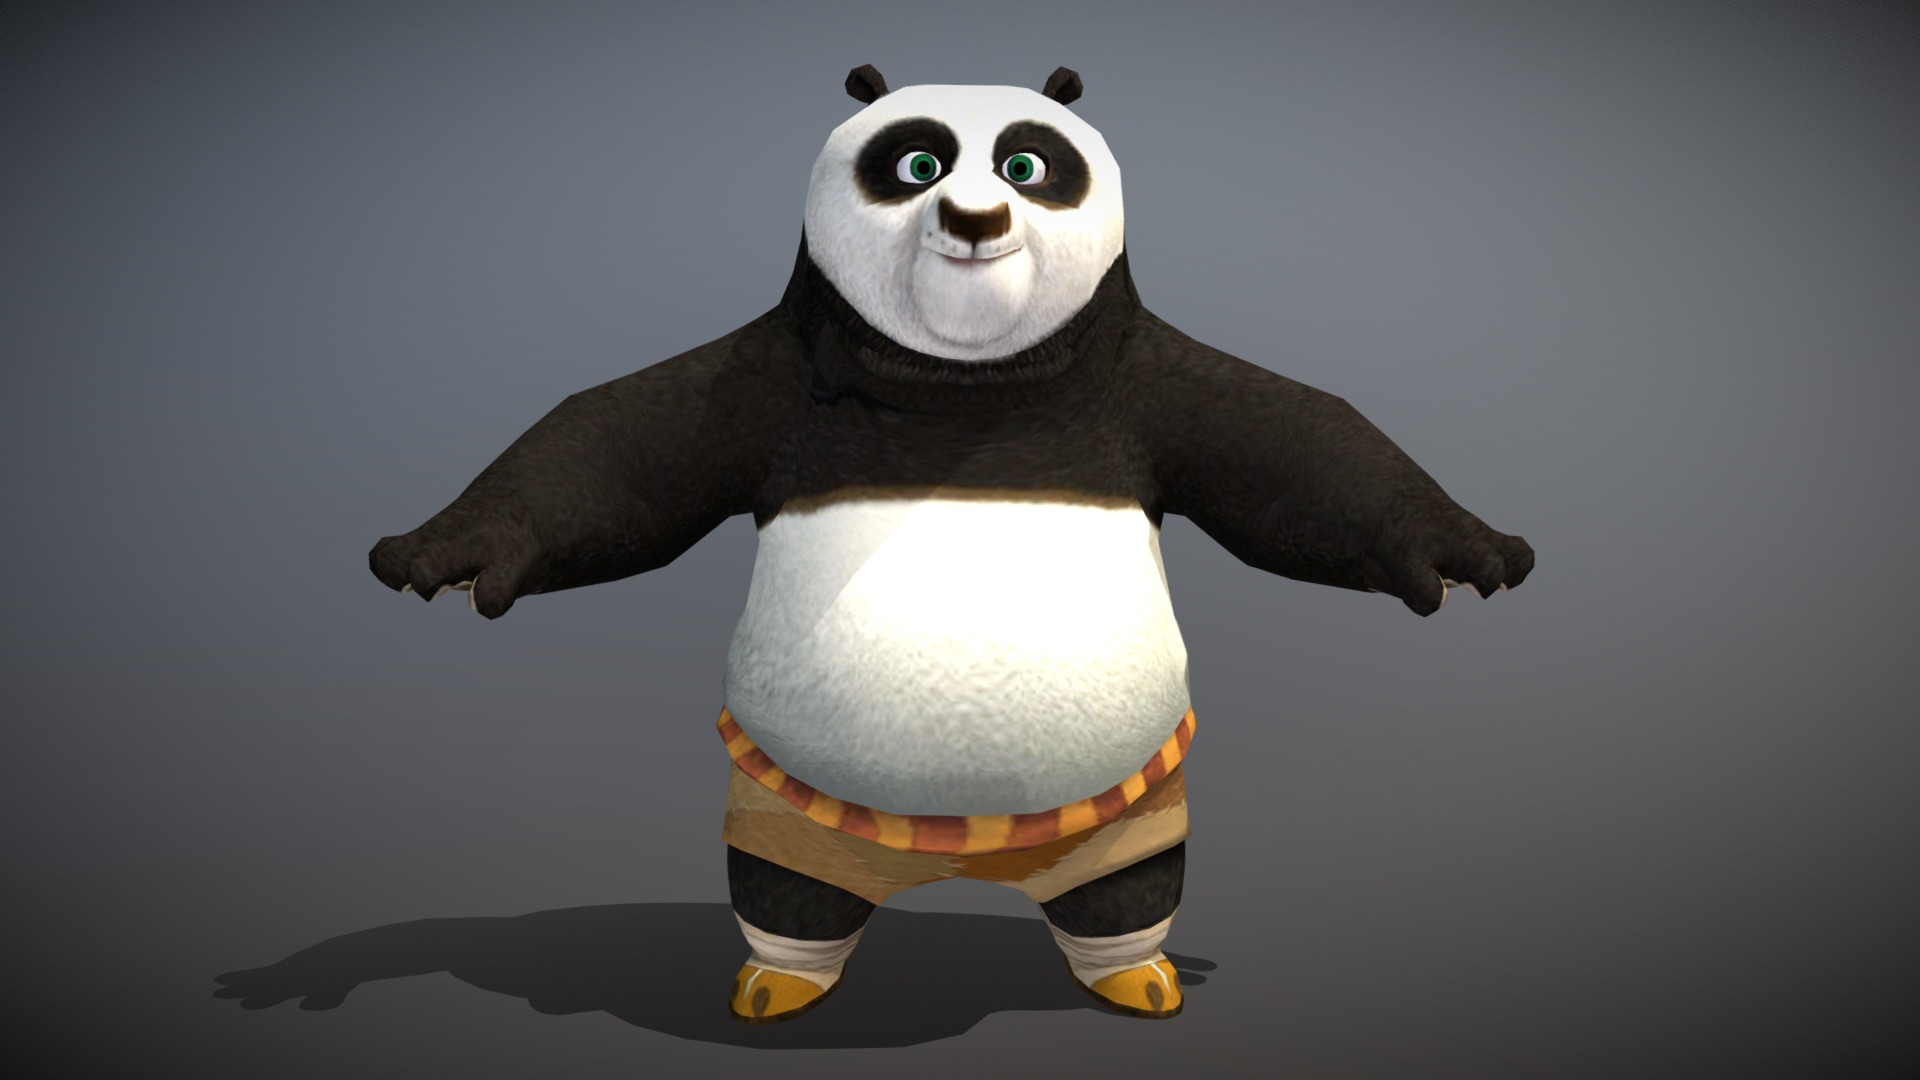 3D model Kung Fu Panda - This is a 3D model of the Kung Fu Panda. The 3D model is about a stuffed animal of a panda.